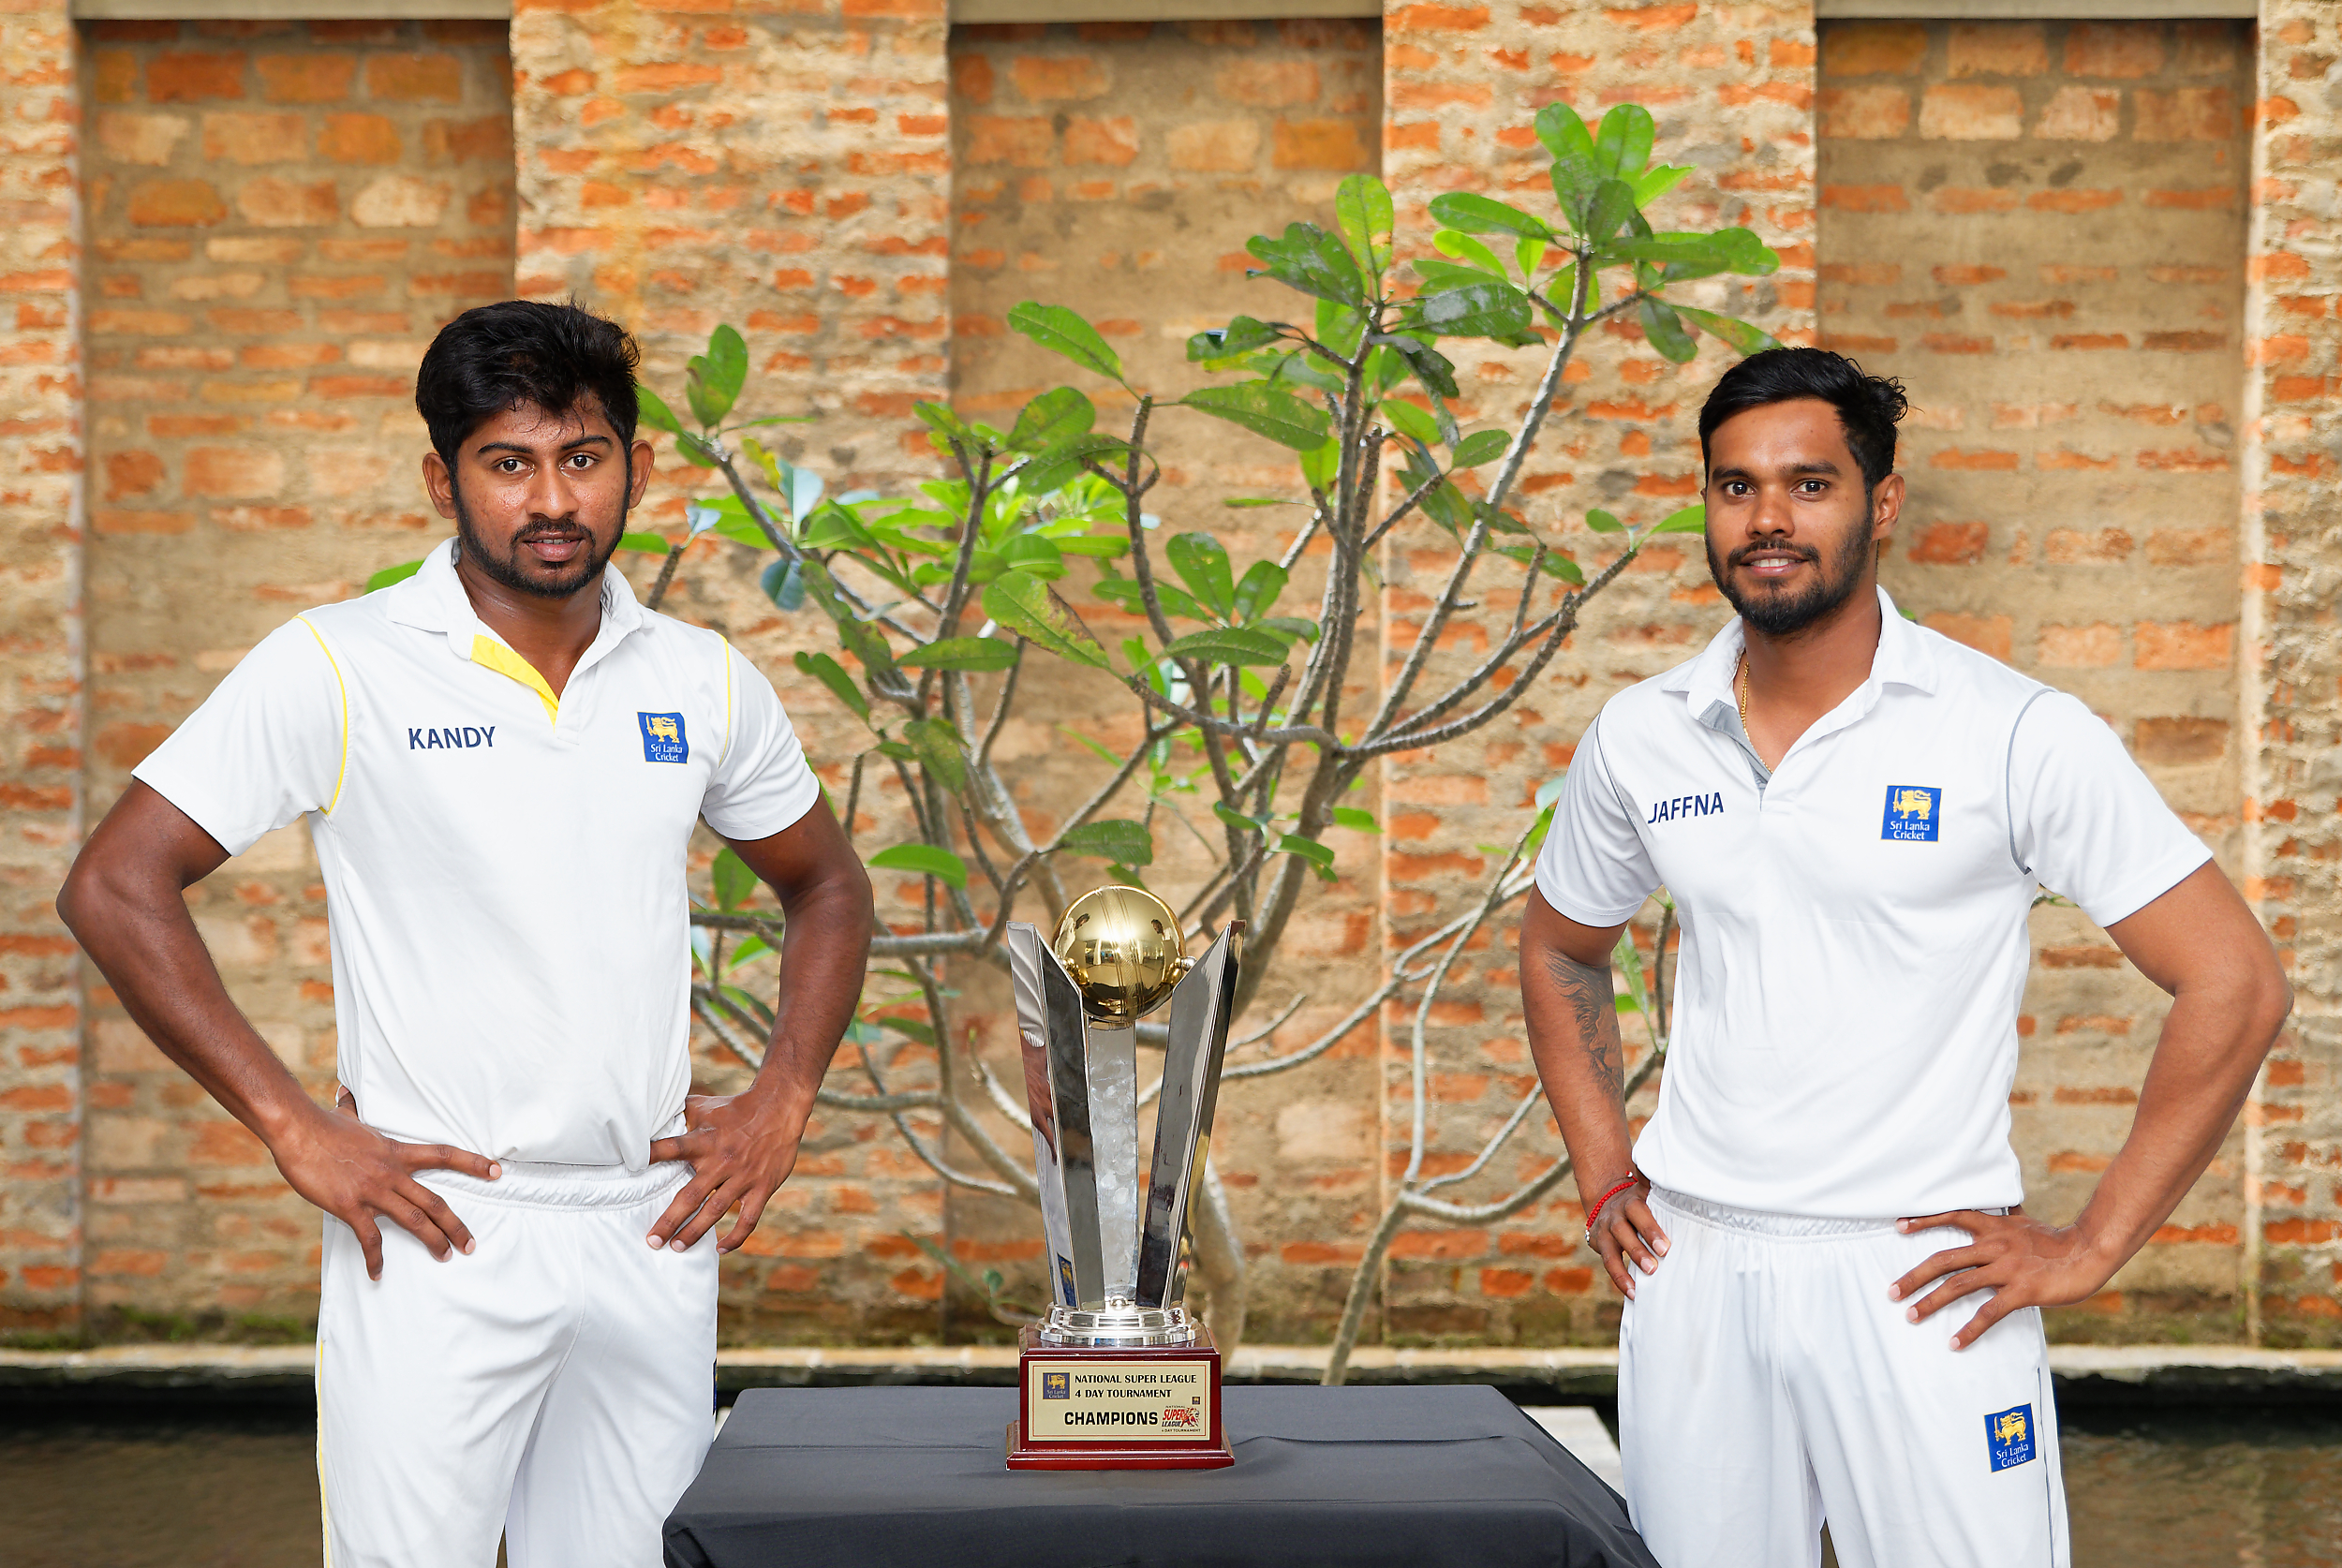 Jaffna-Kandy final holds out a battle of wits